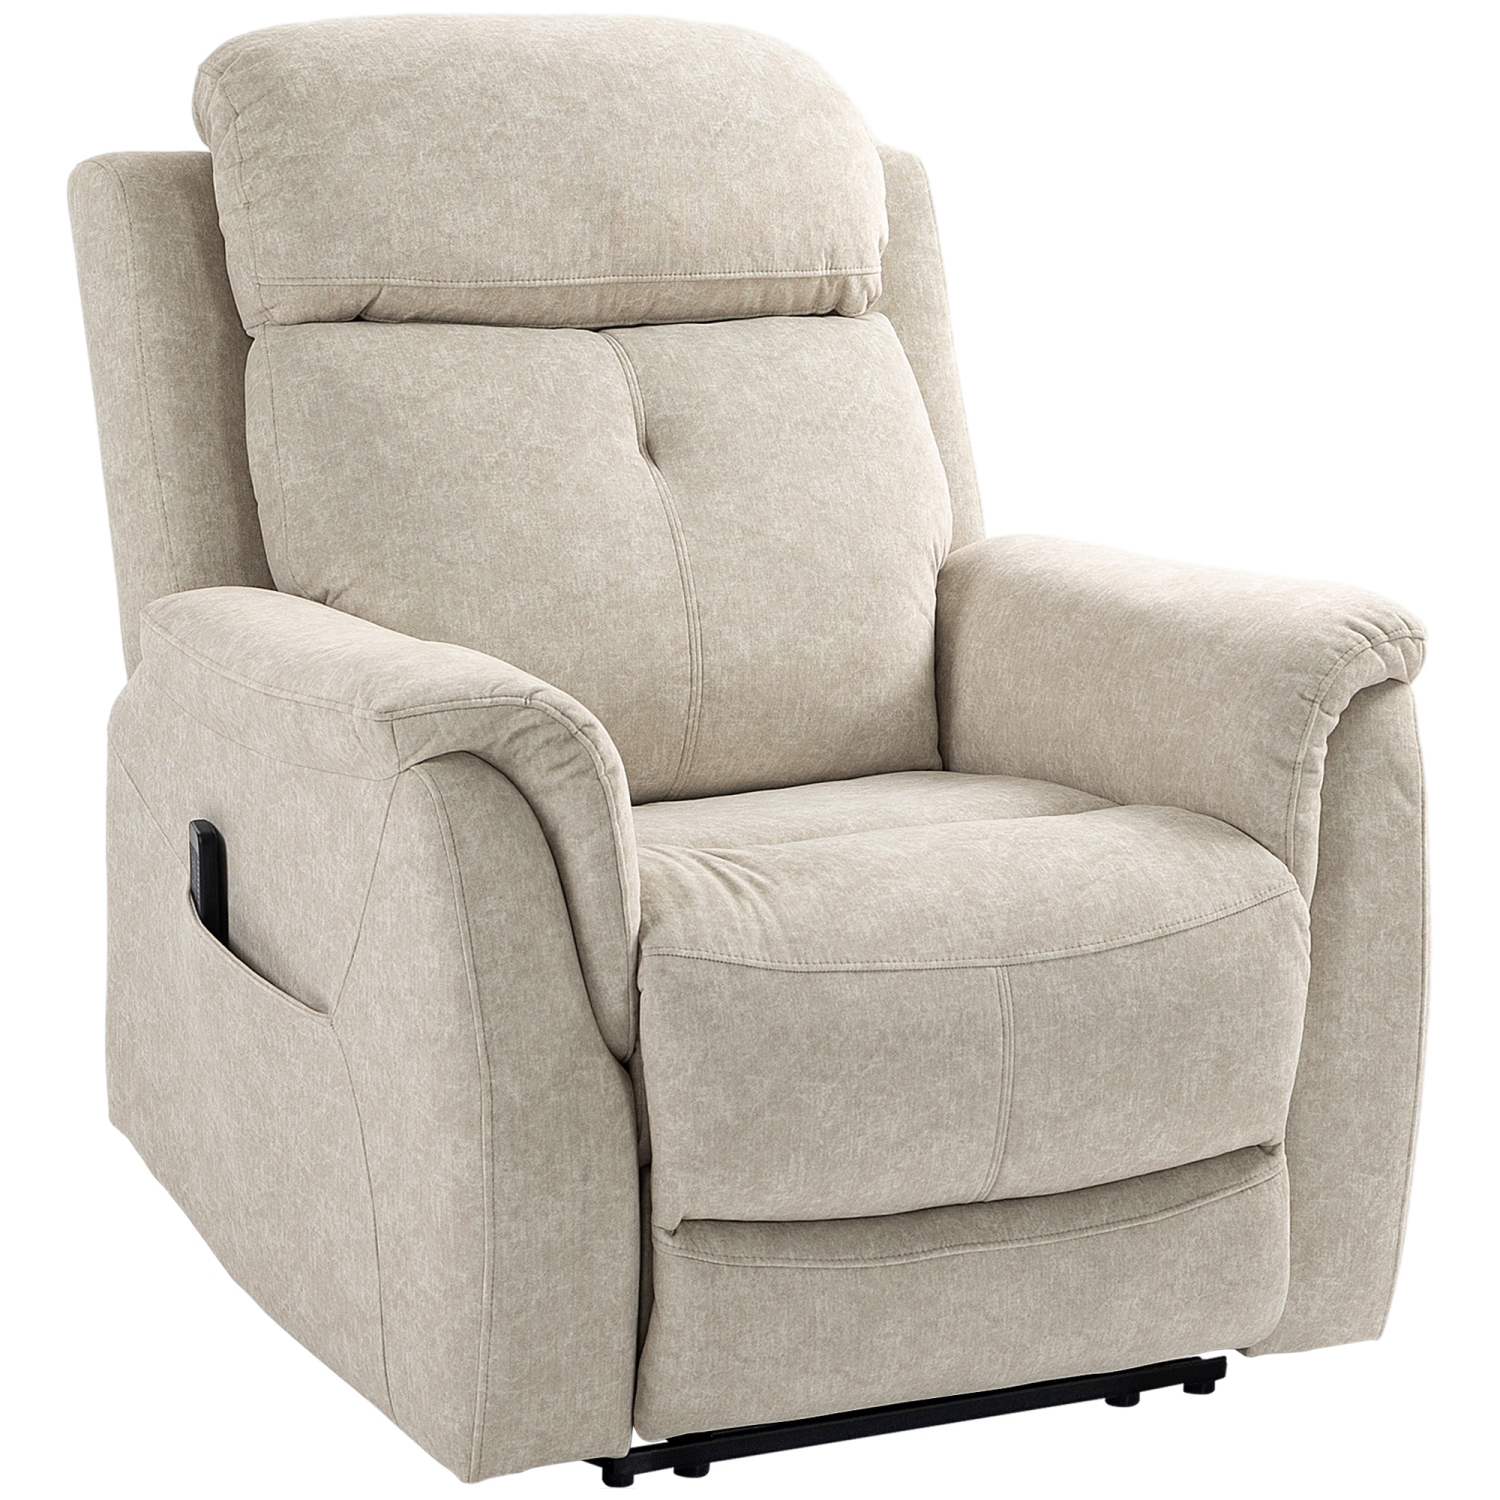 HOMCOM 8-Point Vibration Massage Recliner Chair, Manual Fabric Reclining Chair for Living Room with Side Pockets, Remote Control, Retractable Footrest, Beige